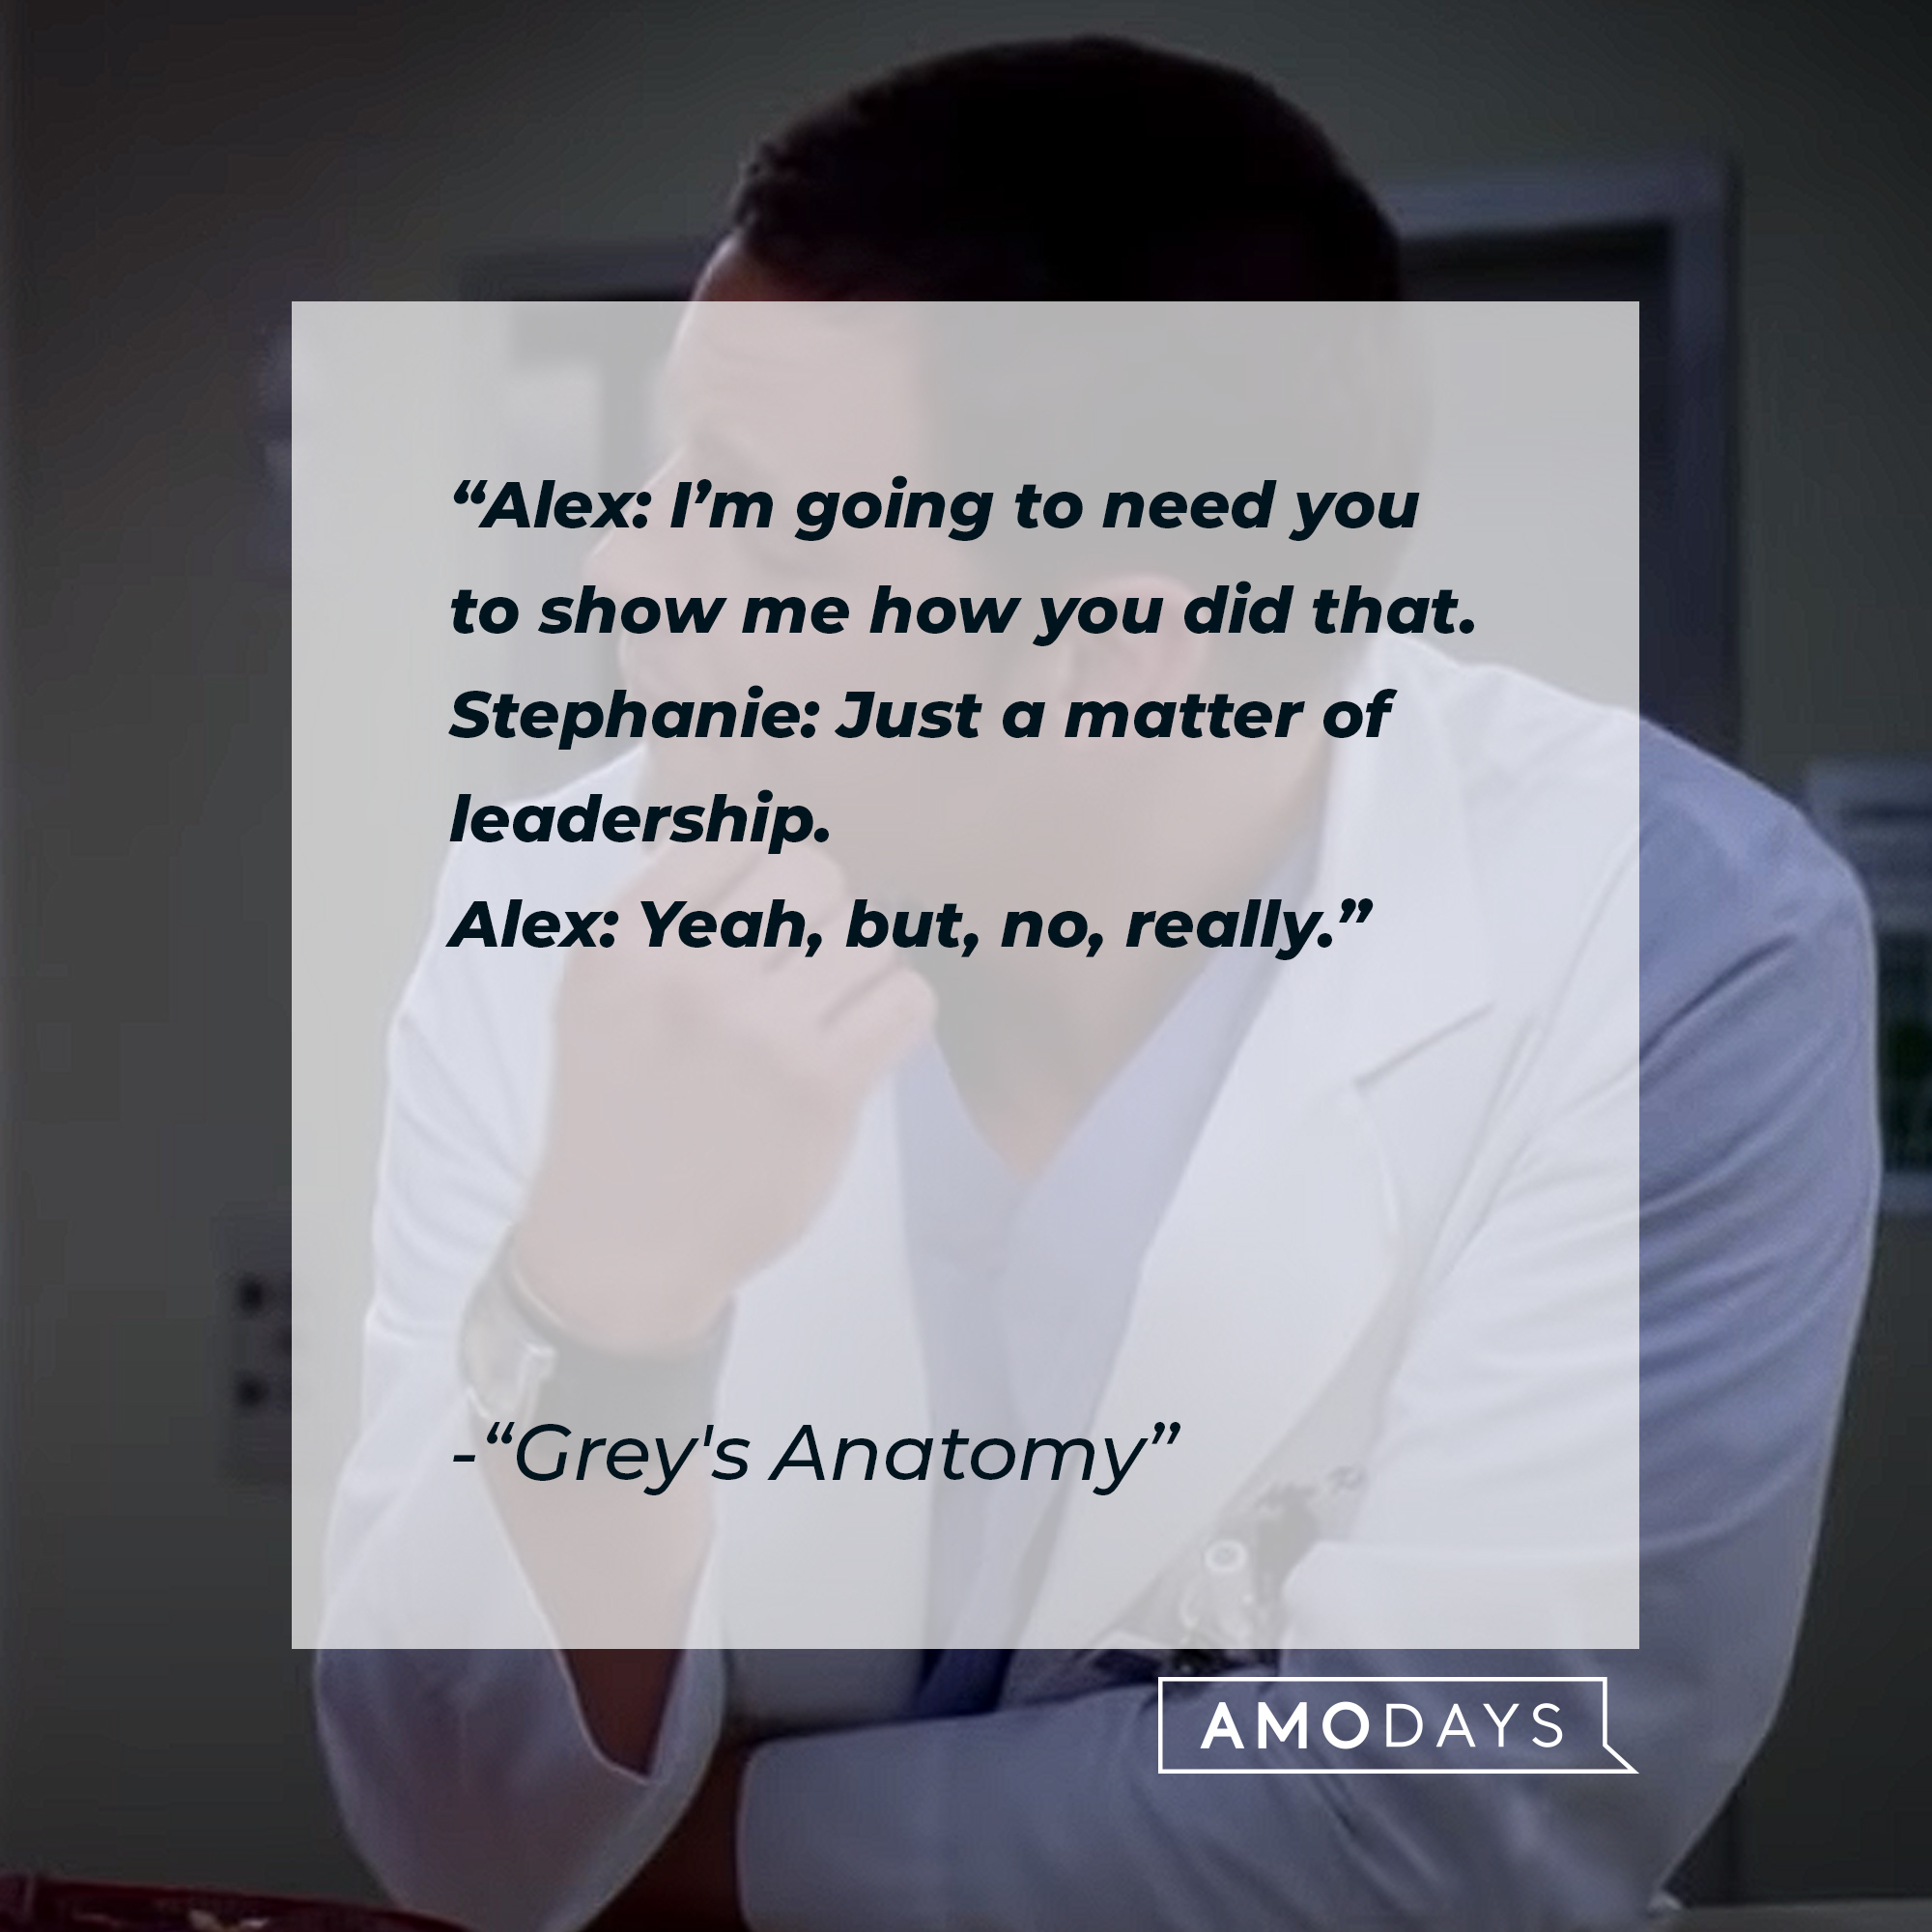 Quote from “Grey’s Anatomy”: “Alex: I’m going to need you to show me how you did that. Stephanie: Just a matter of leadership. Alex: Yeah, but, no, really.” | Source: youtube.com/ABCNetwork